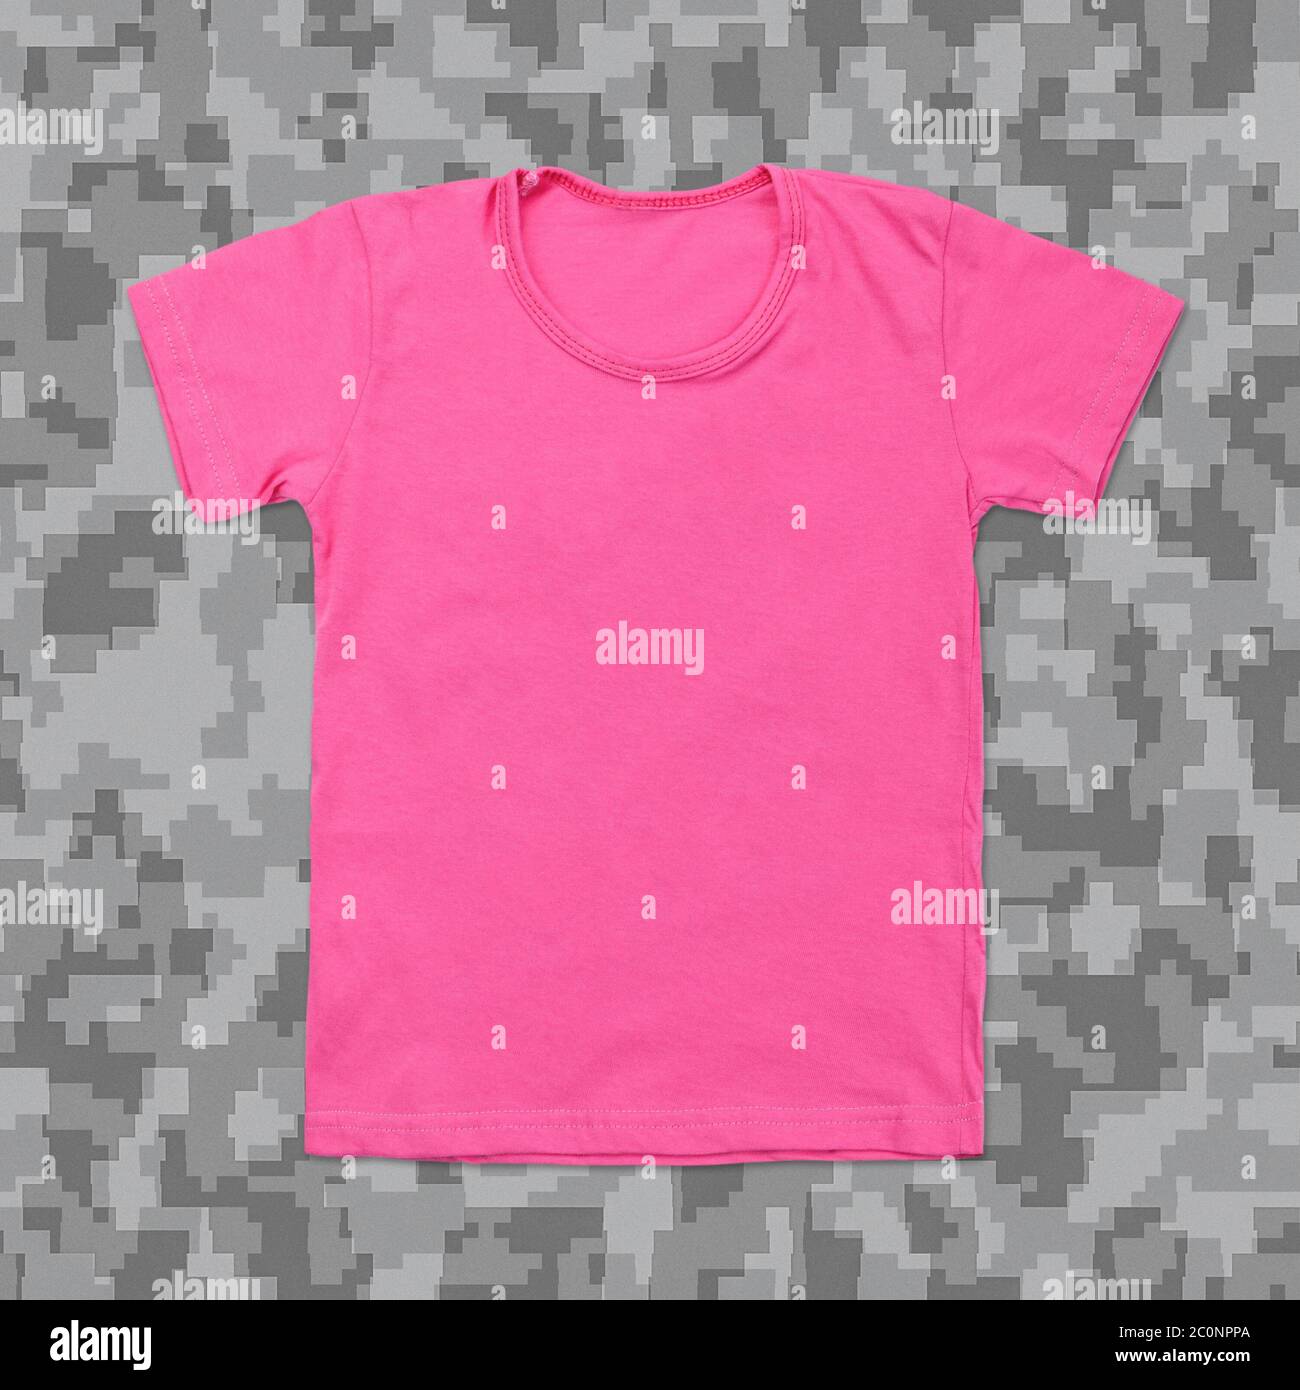 Pink blank t-shirt on camouflage background Stock Photo